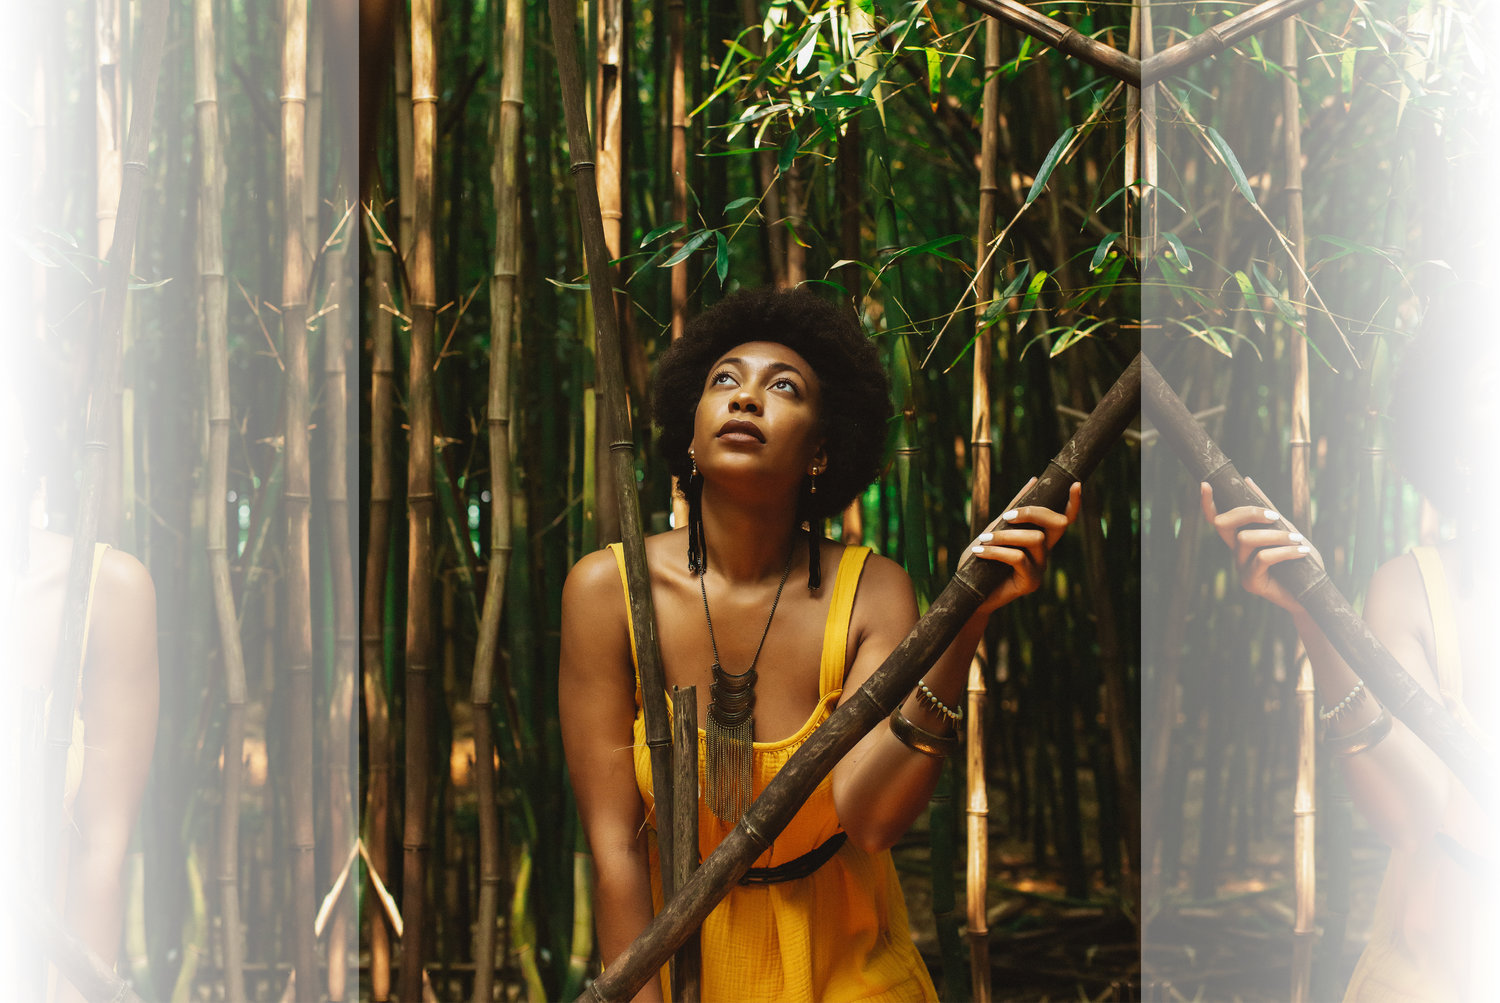 Singer Alexus Lee photographed in a bamboo grove